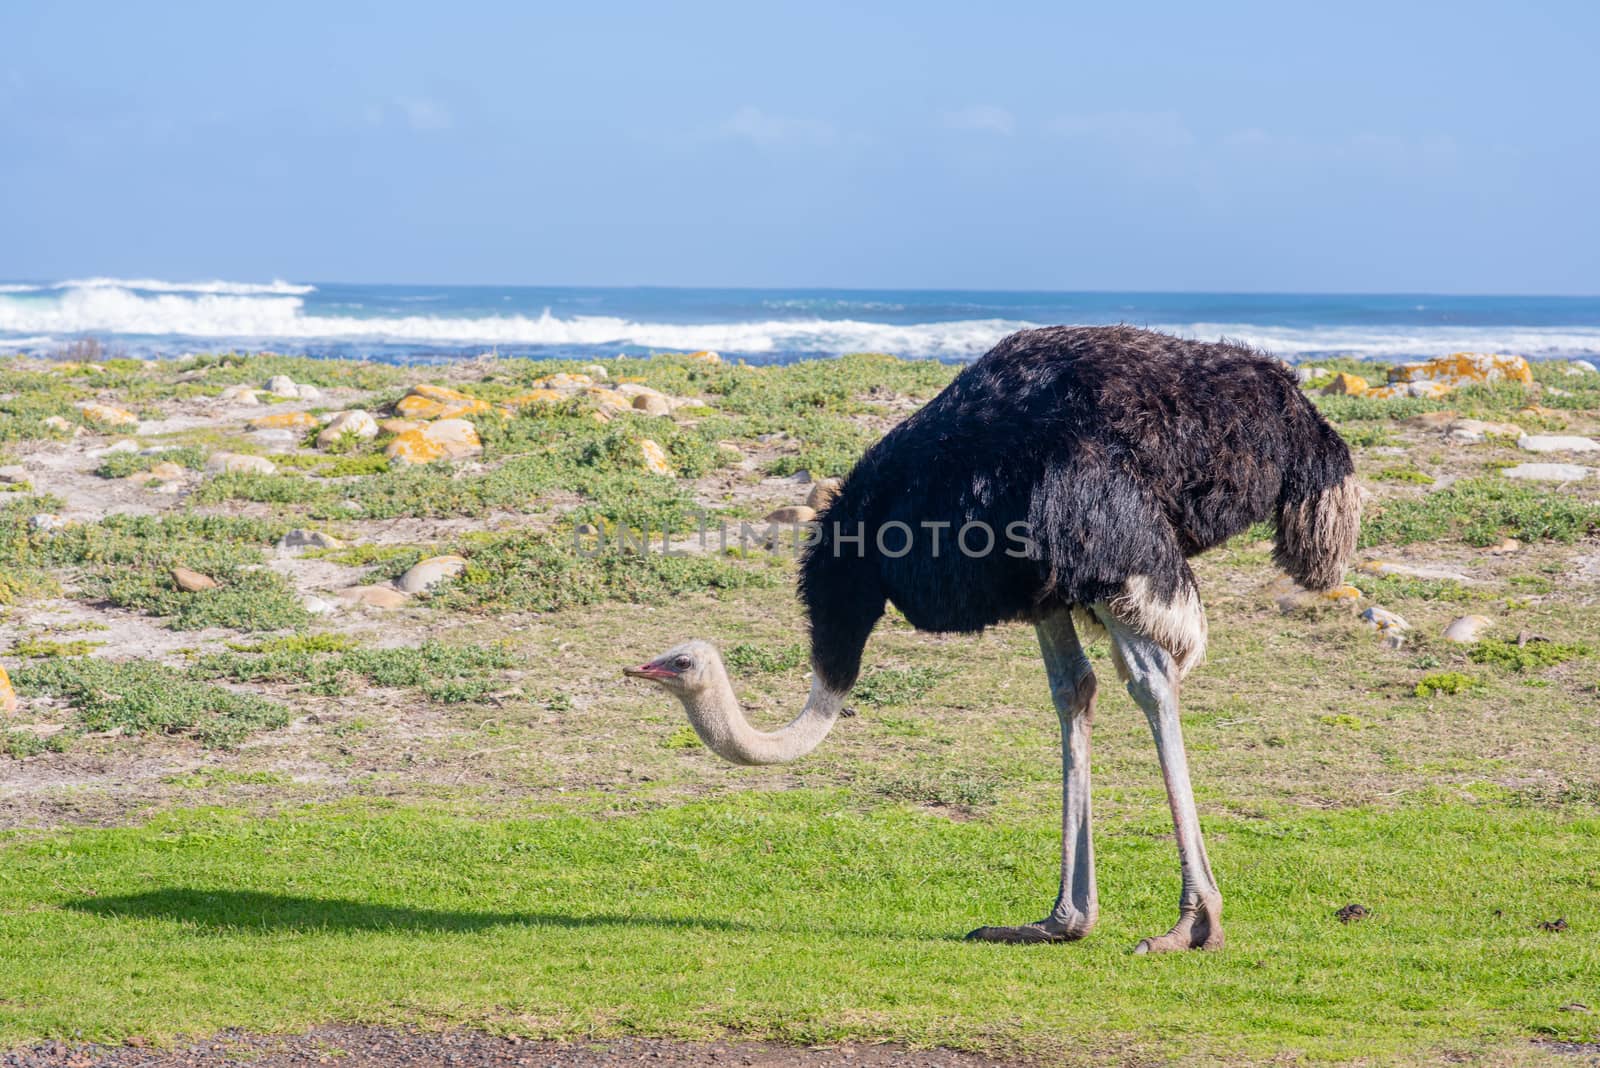 Ostrich searching for food near ocean with crashing waves by rushay